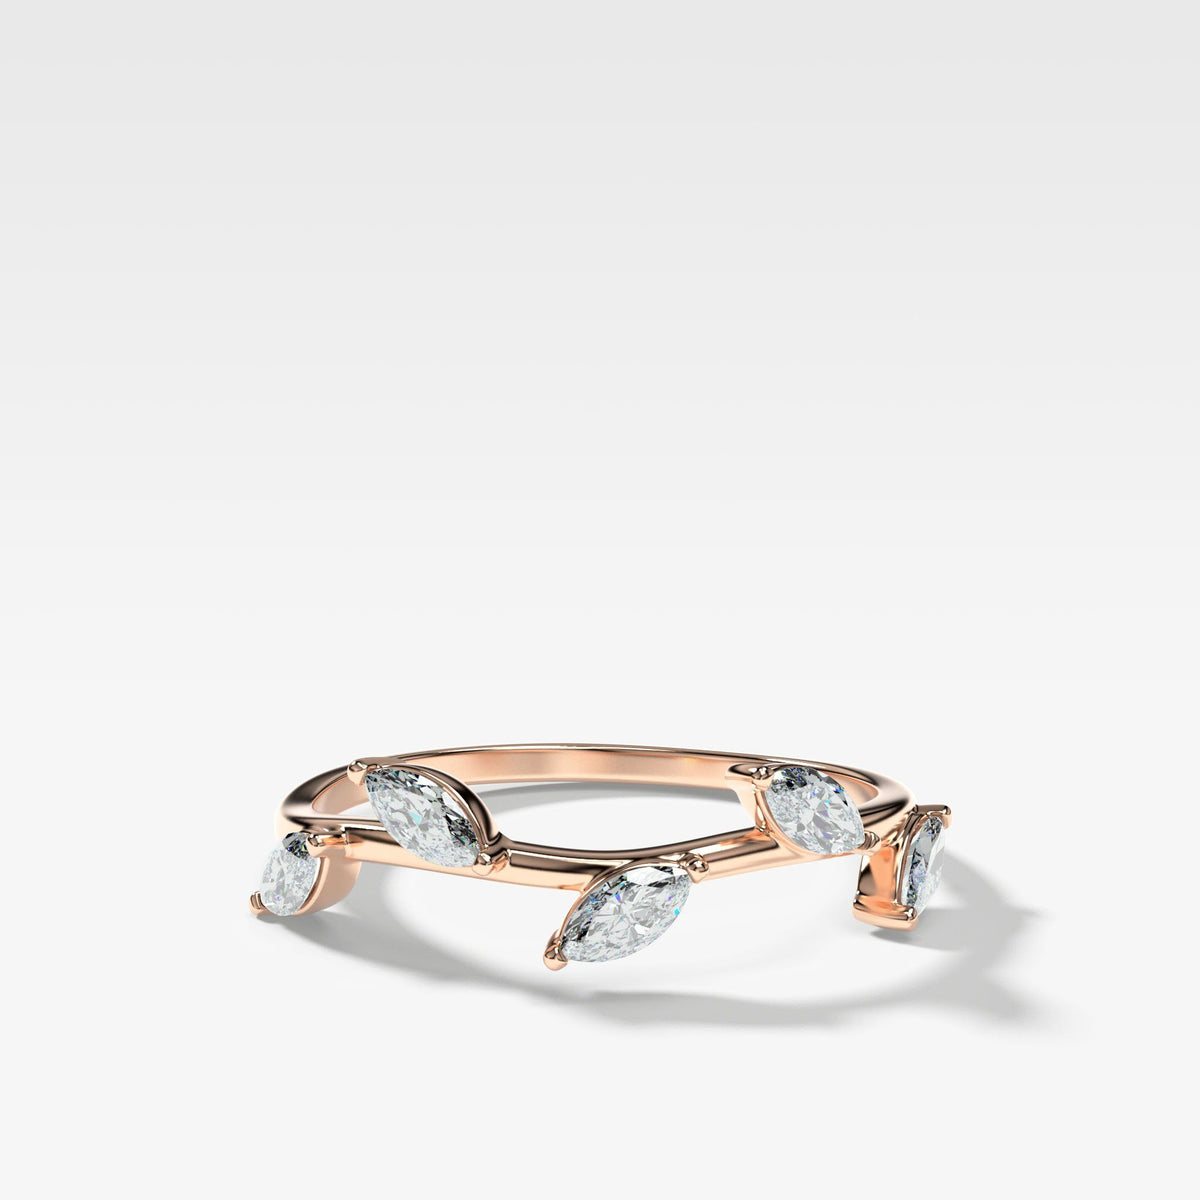 Laurel Marquise Wedding Band by Good Stone available in Gold and Platinum